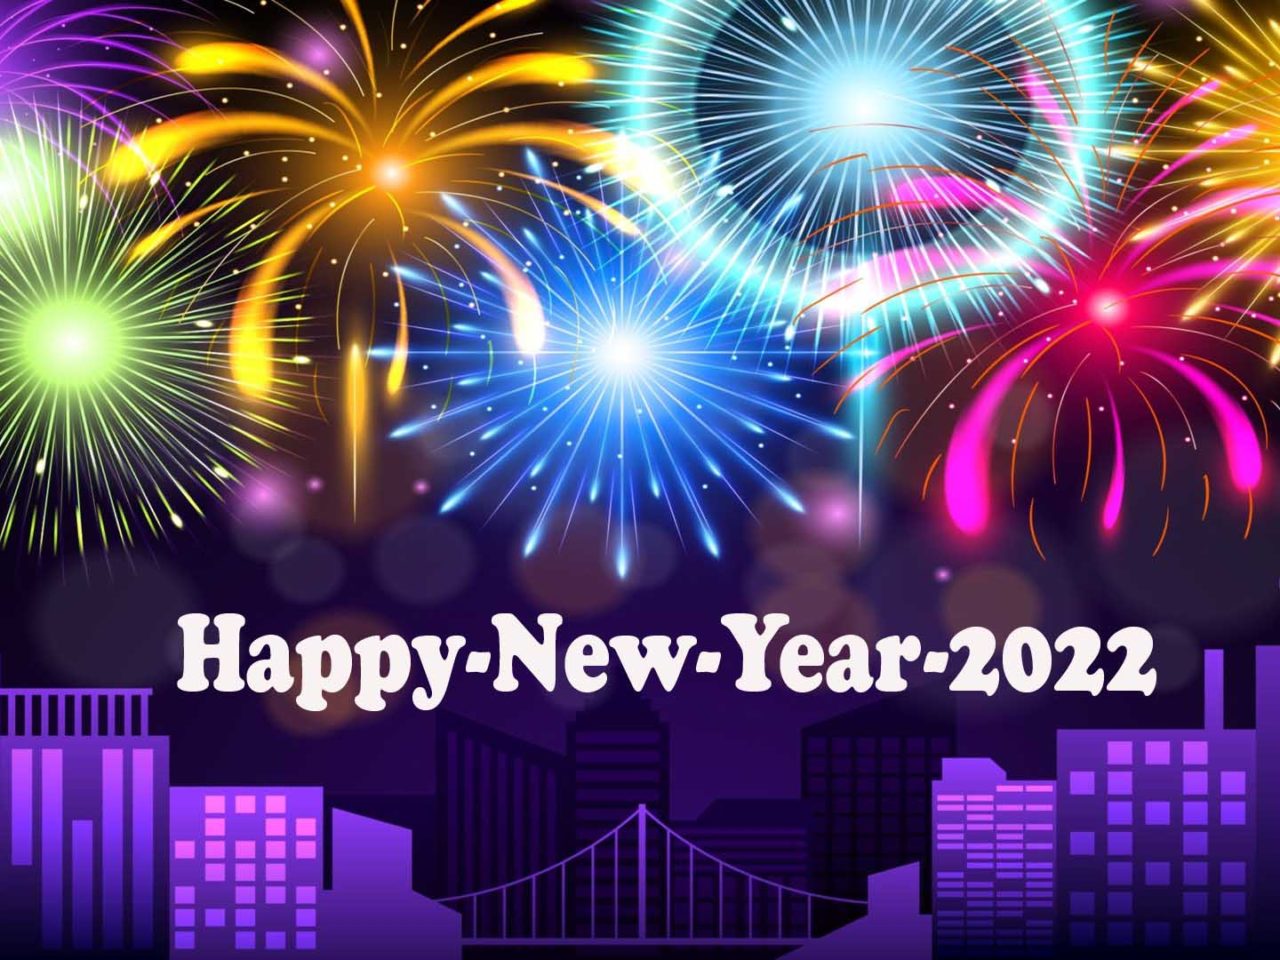 Happy New Year 2022 Greeting Card For Android Mobile Phones HD Wallpaper %, Wallpaper13.com